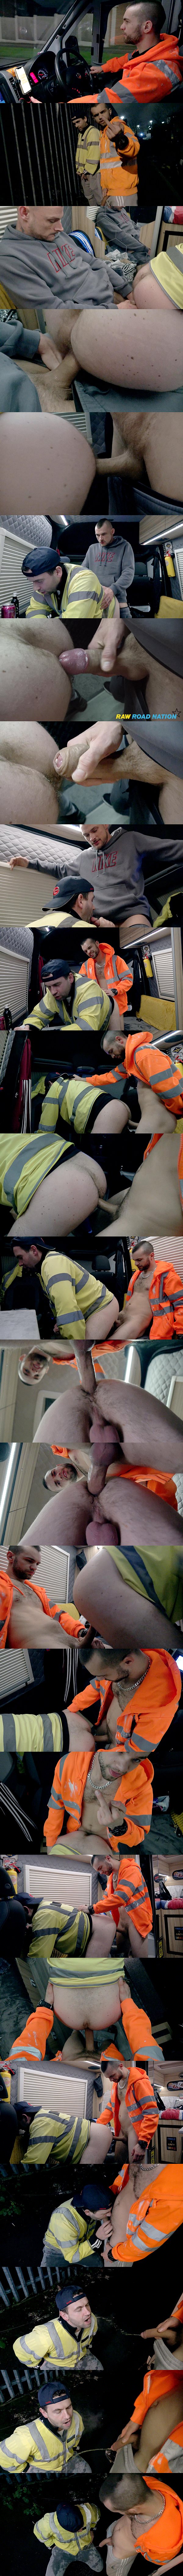 Rawroadnation - construction workers Tony Parker and Mikey Lee bareback and creampie an anonymous truck driver in Frothed Up Cum-Bucket Double Filled With Whizz Dripping Cocks 02